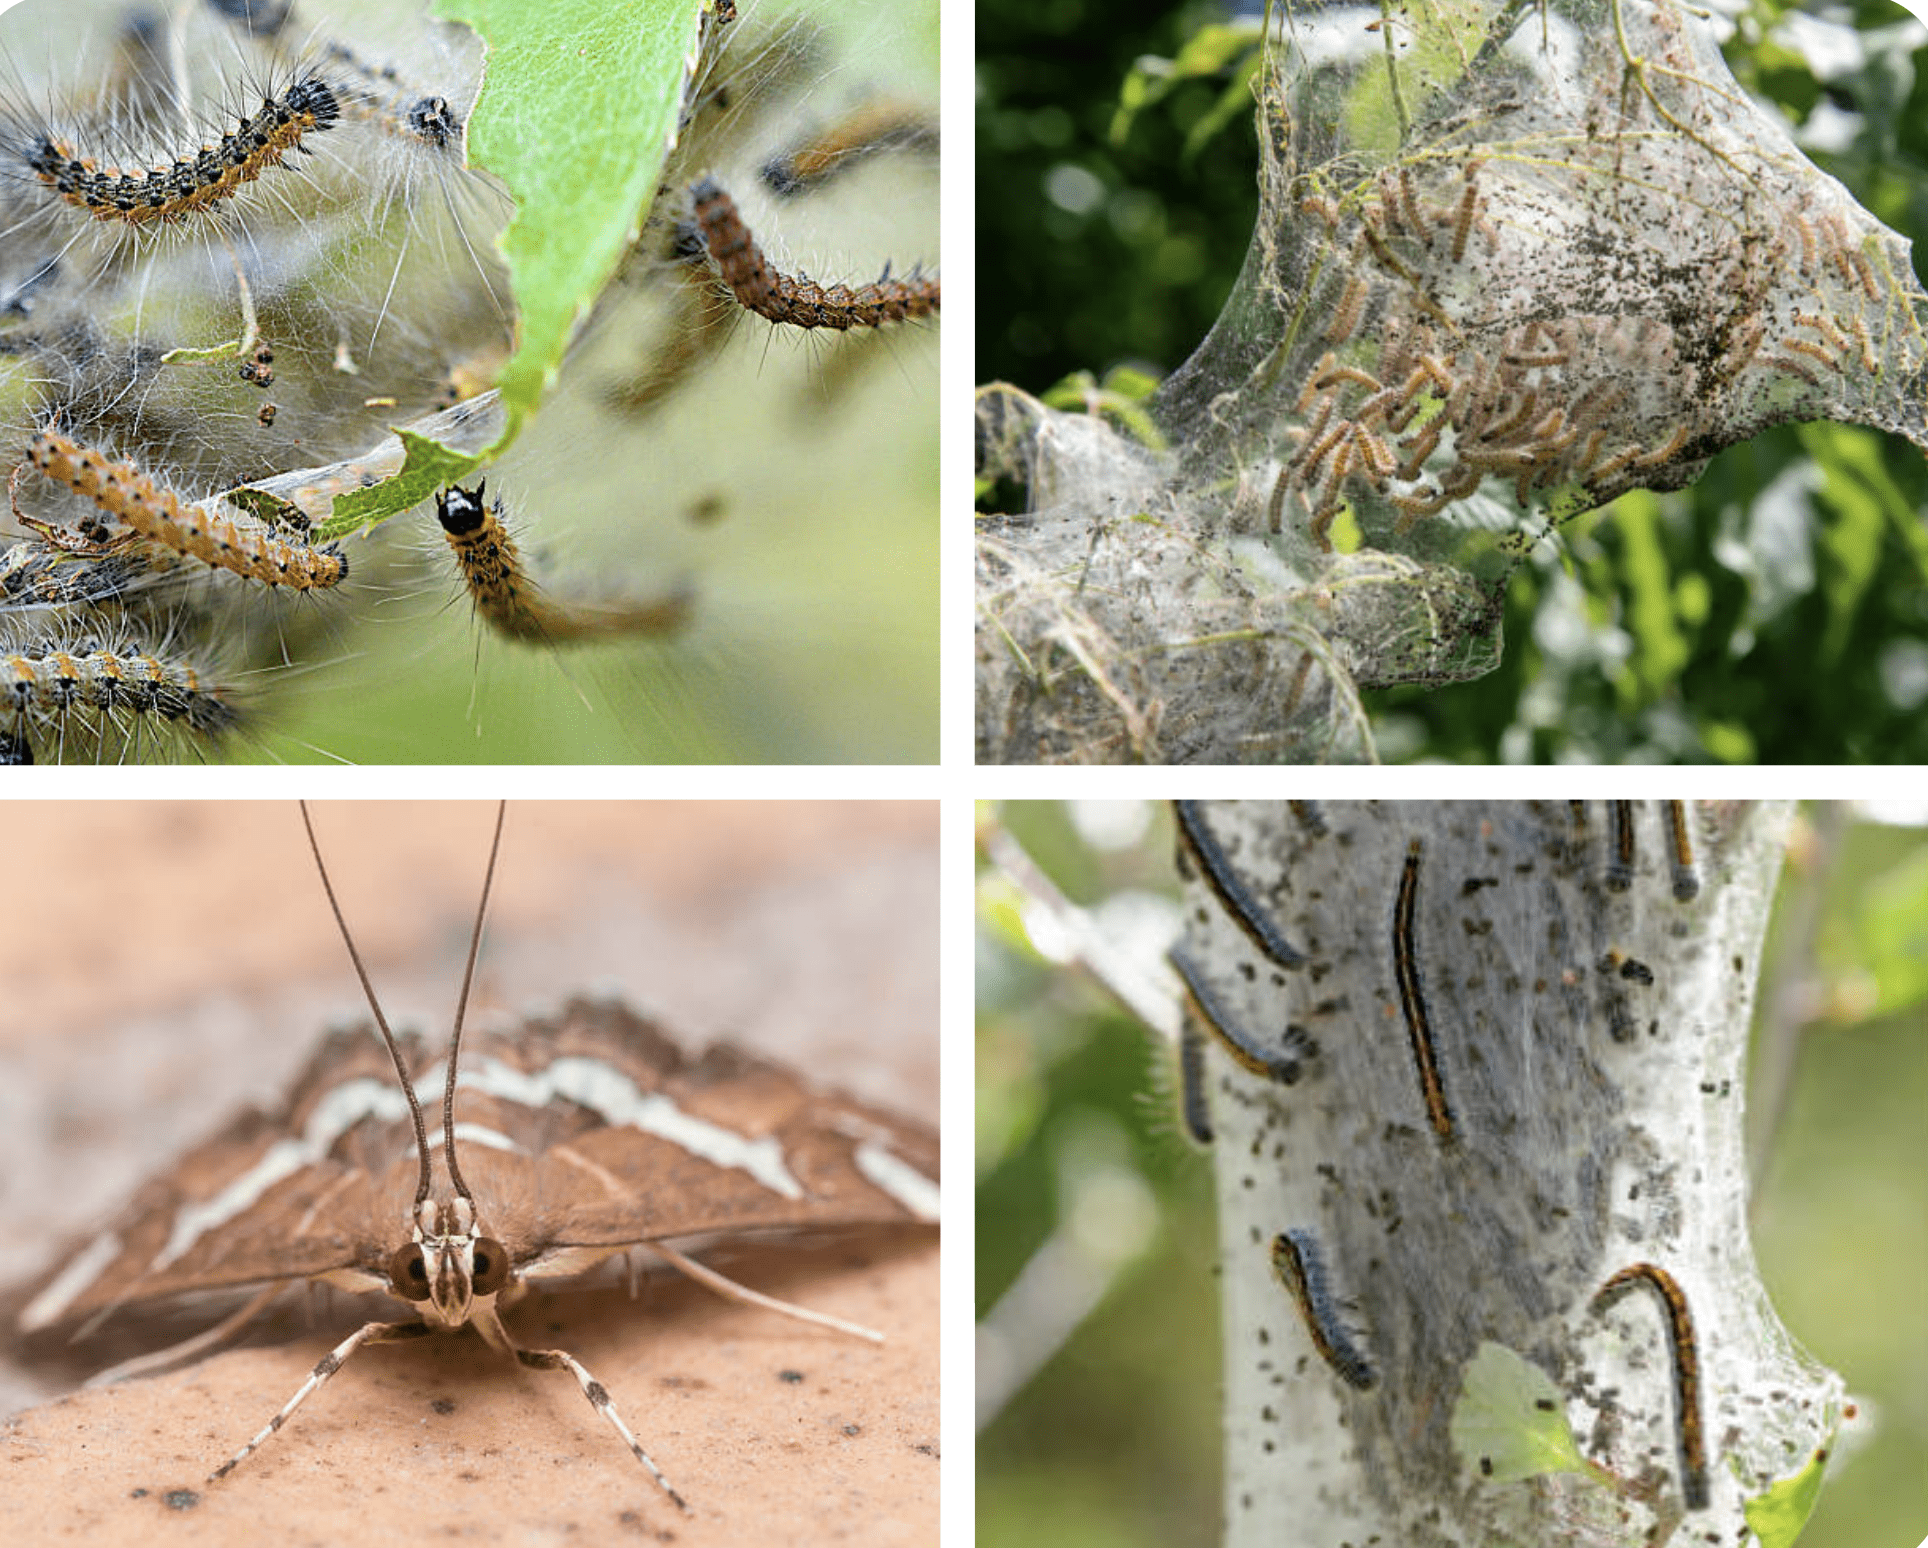 Fall webworms infestations and how to deal with them by AgriLife’s Mario Villarino